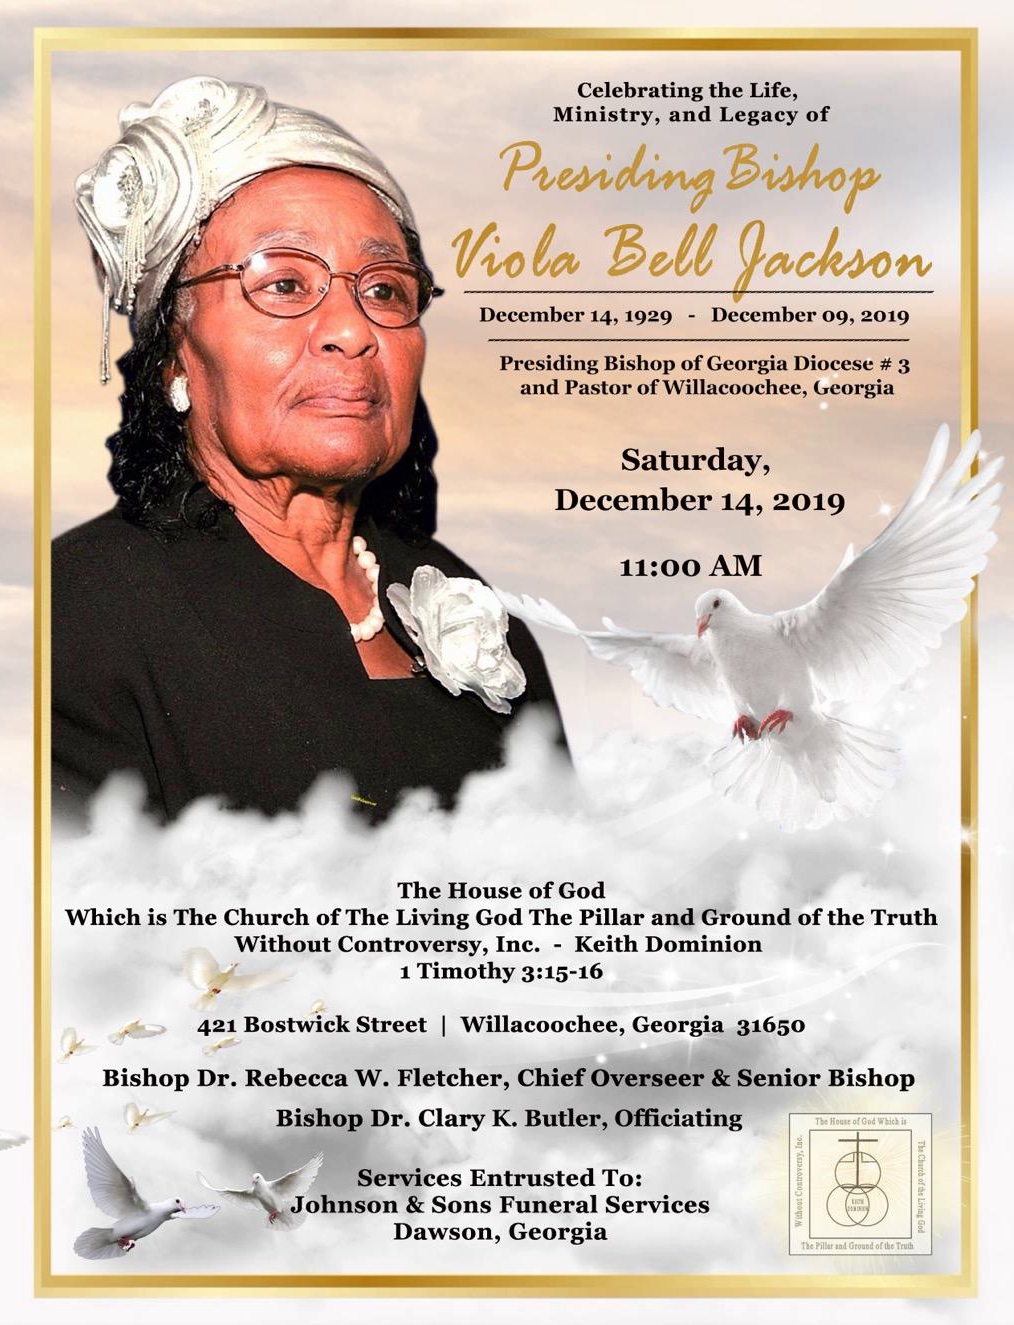 Celebrating the Life, Ministry And Legacy Of Presiding Bishop Viola Bell Jackson